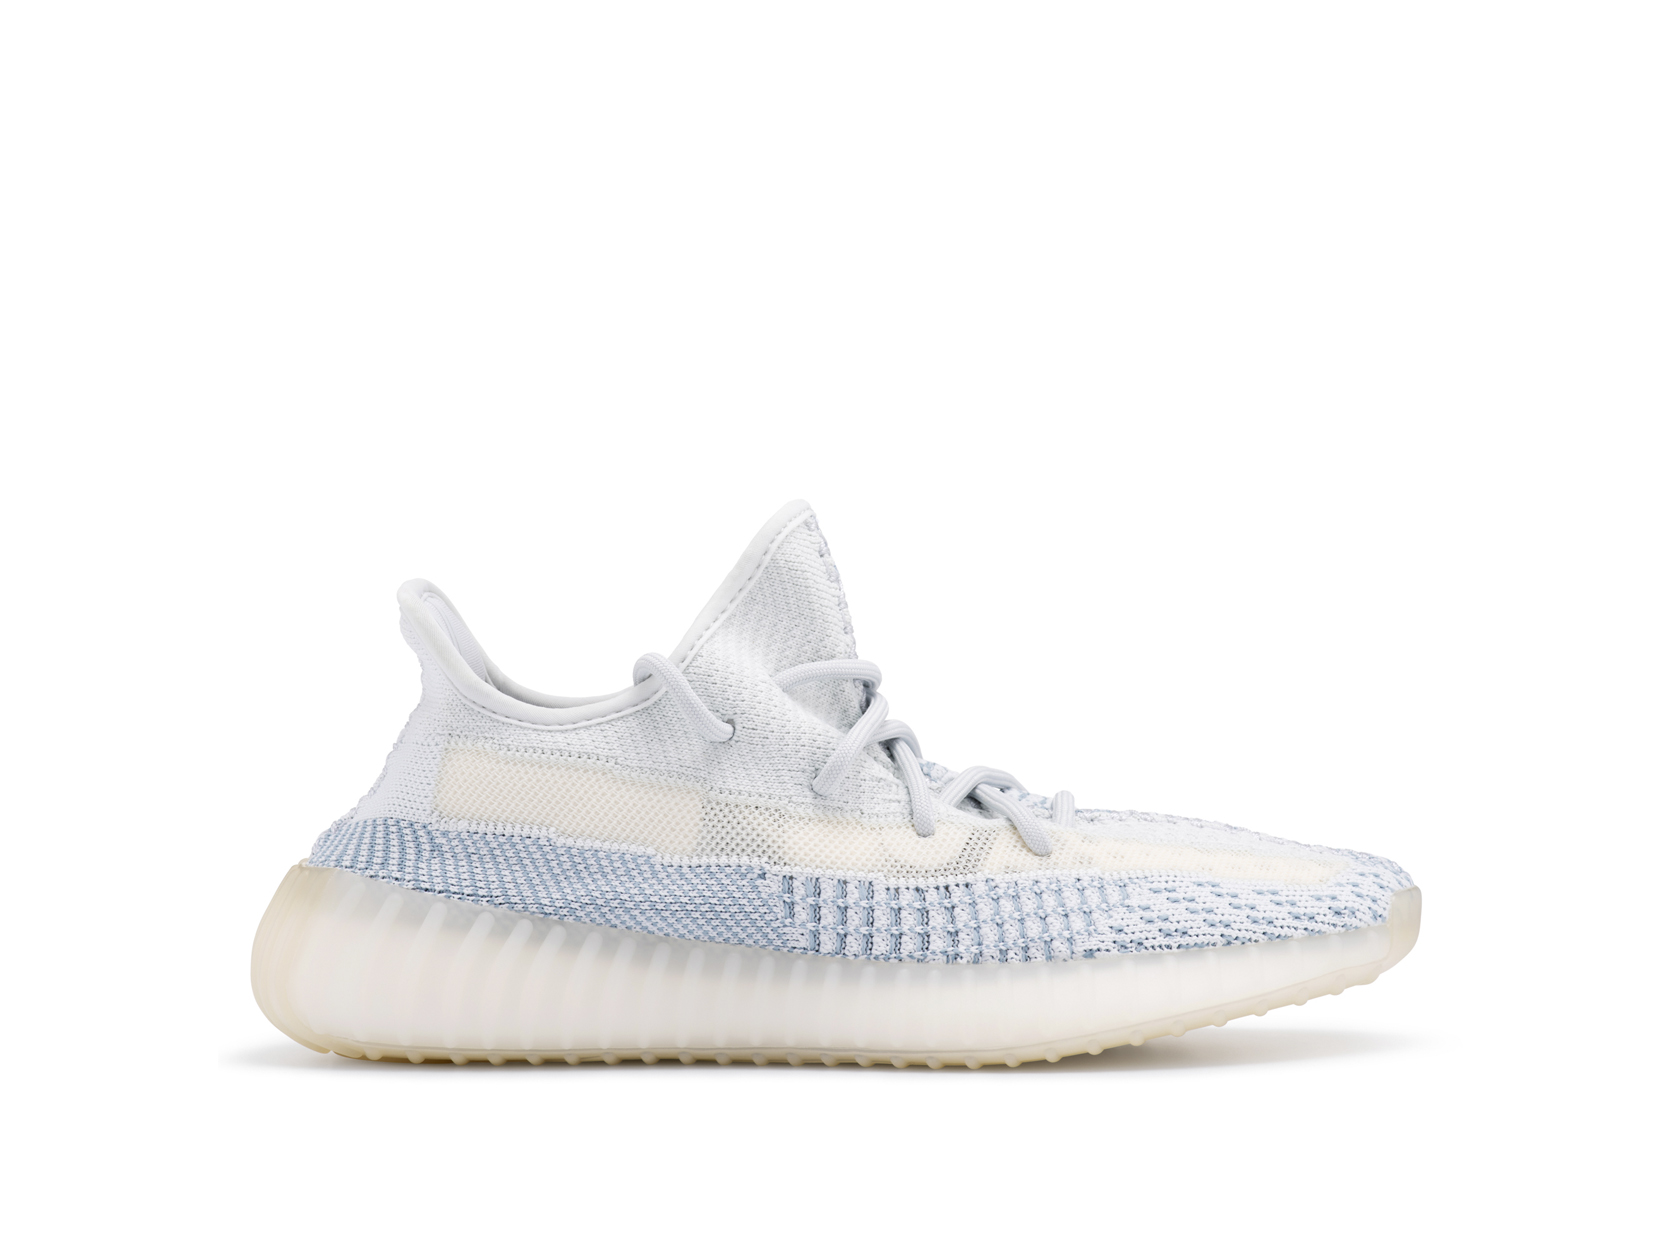 Yeezy Cloud White Boost 350 v2 | FW3043 